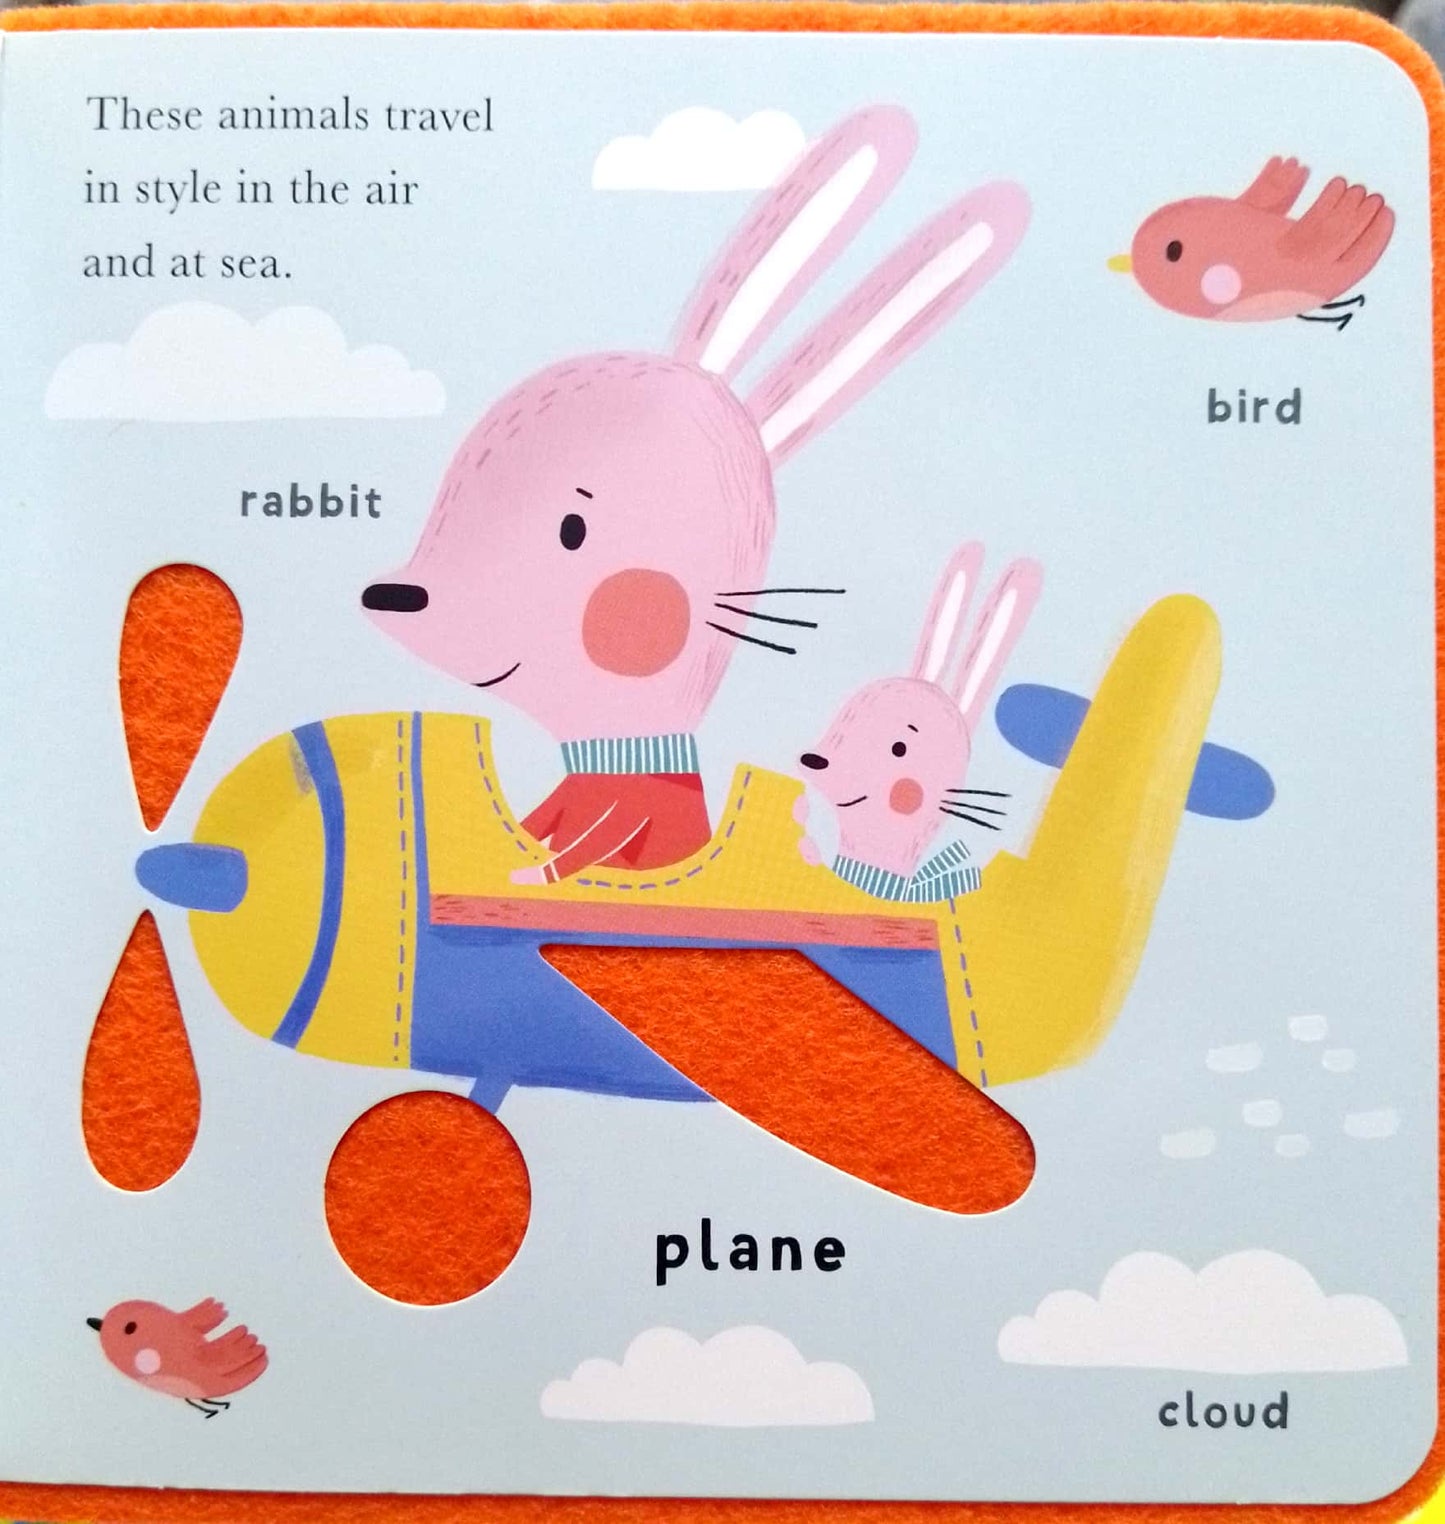 Soft to Touch Words: Vroom - Board Book